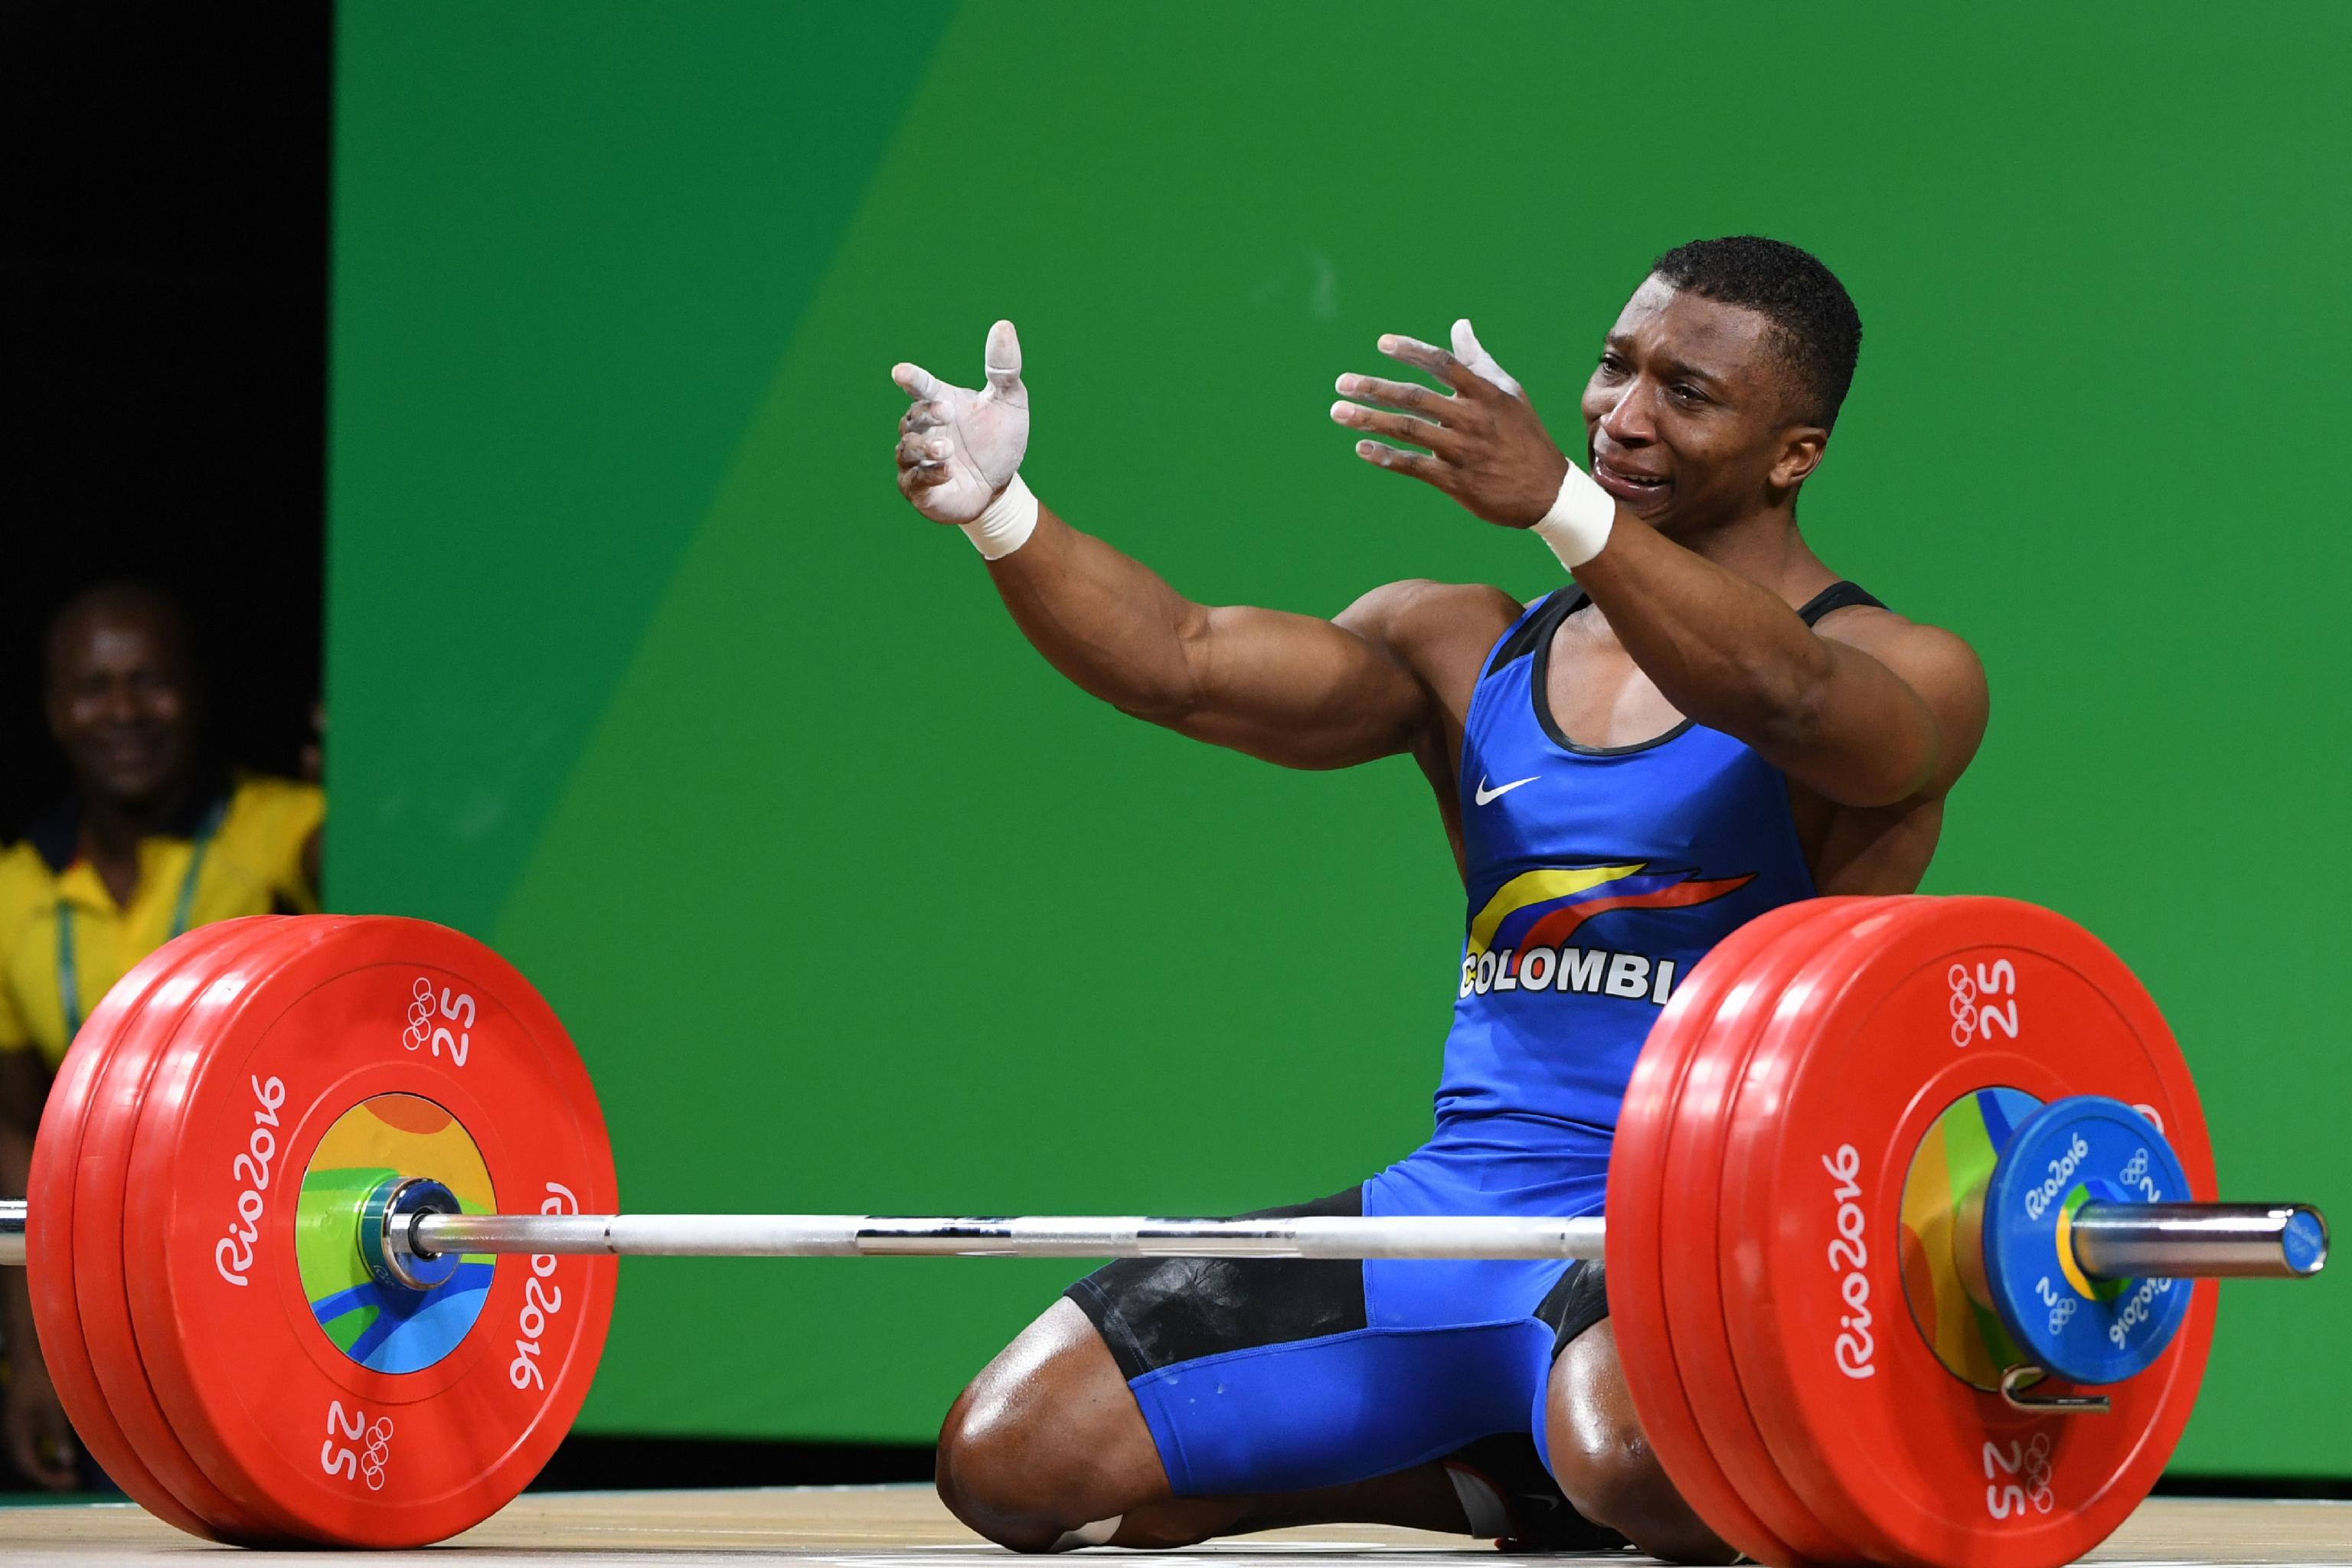 Olympic Weightlifting 2016 Medal Winners and Scores After Monday's Results